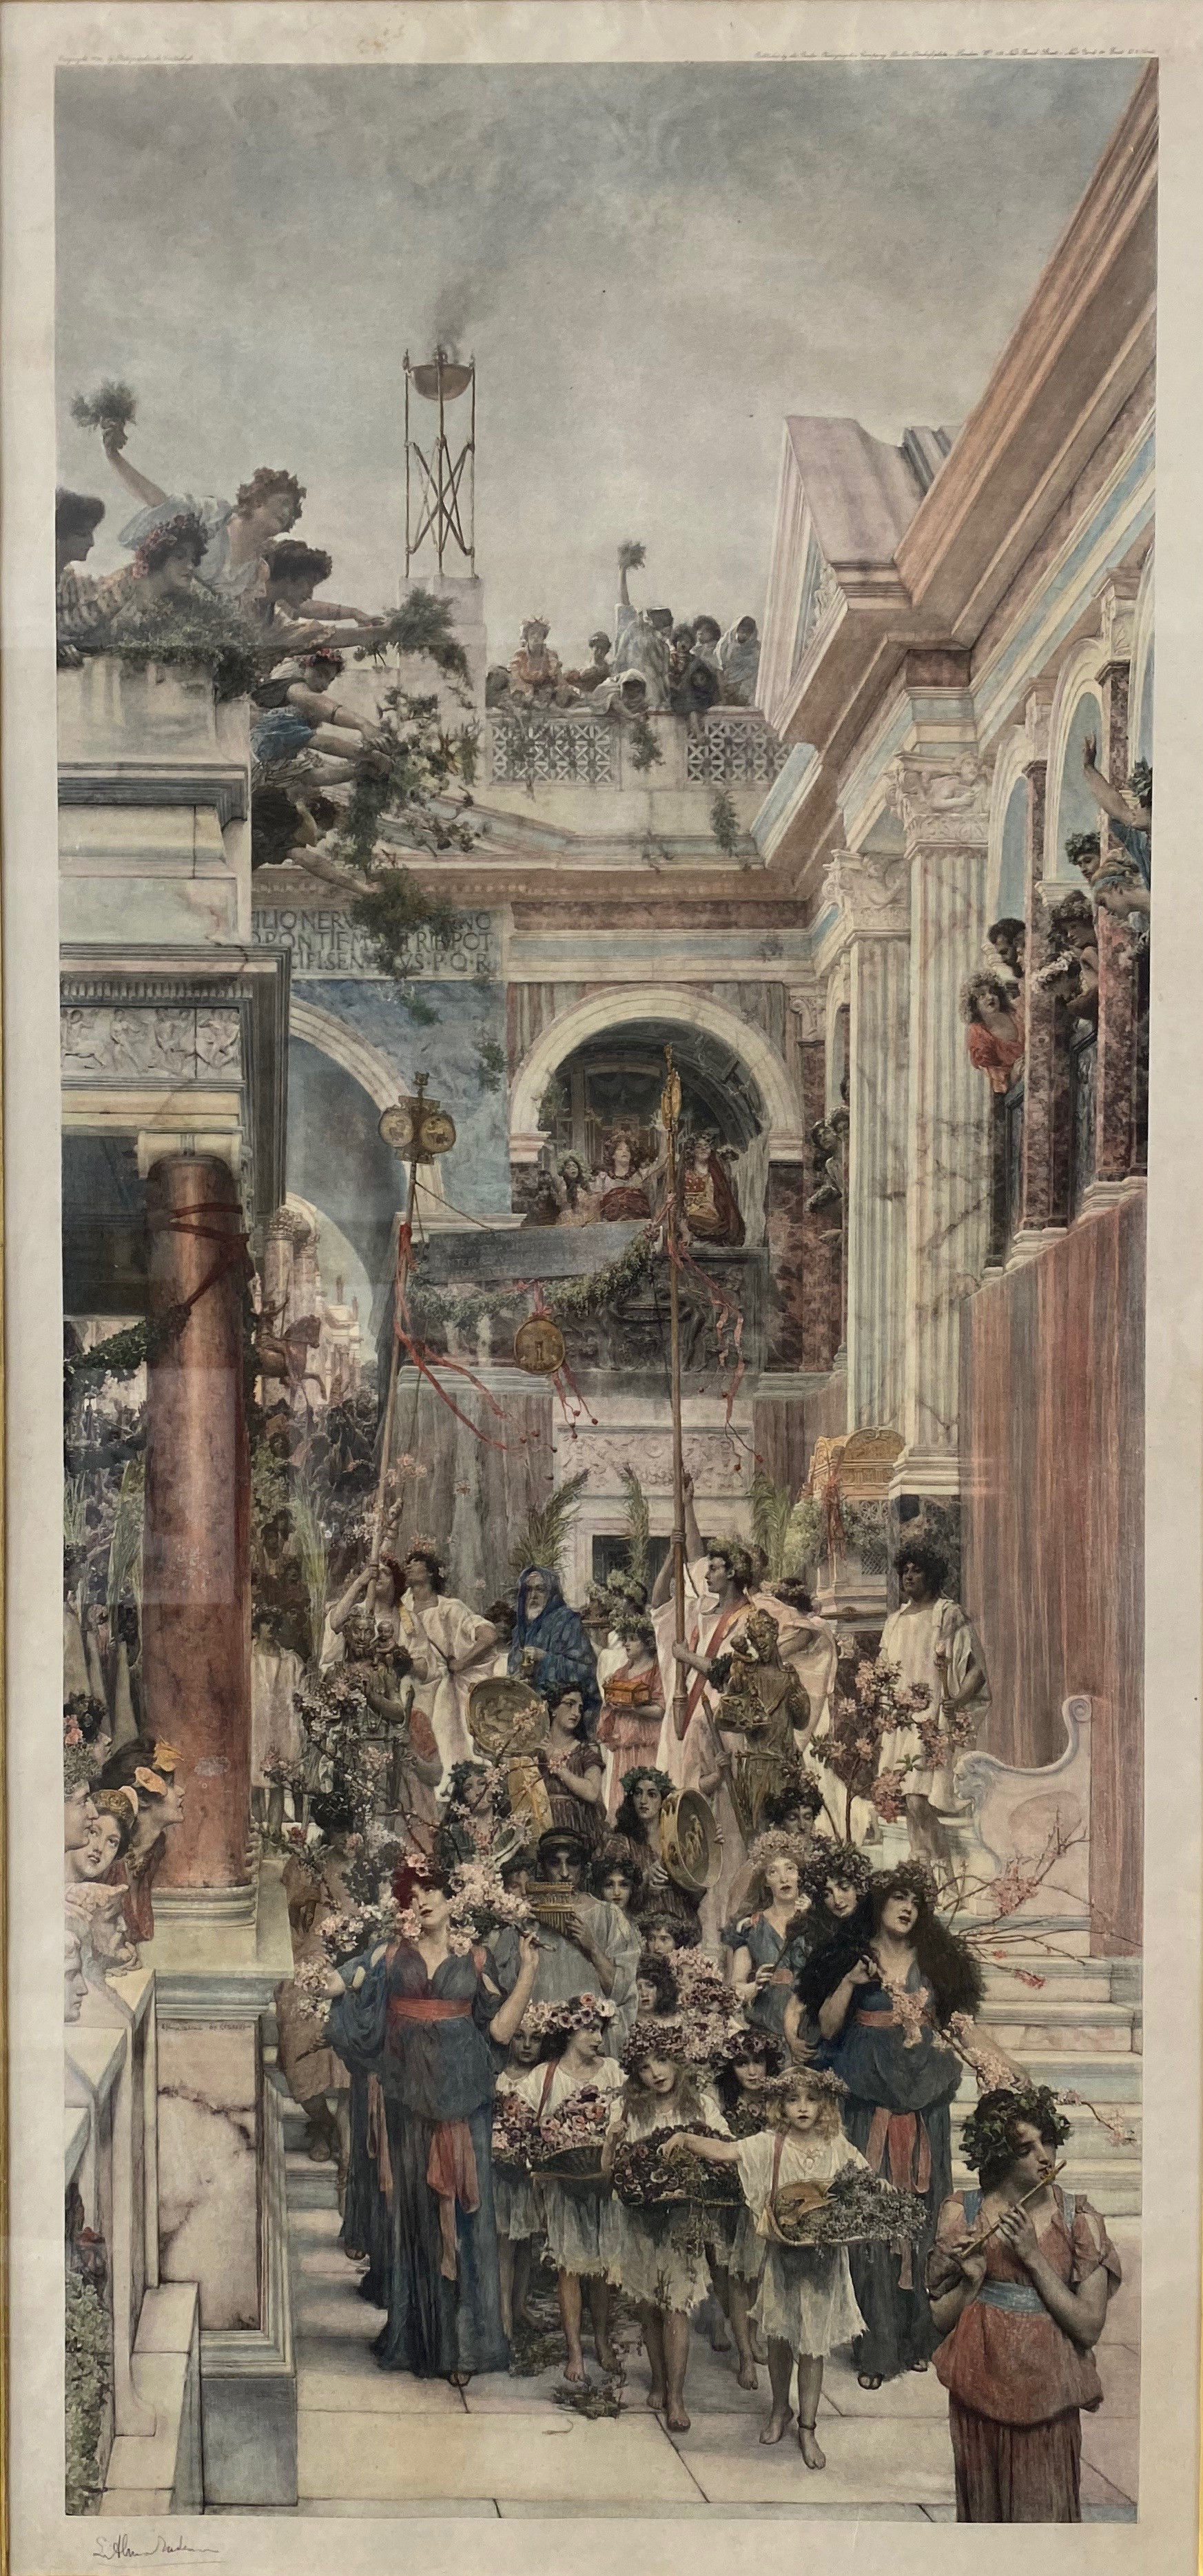 Example of an original photogravure after the painting 'Spring', 1894, by Alma Tadema, see also Gallerease